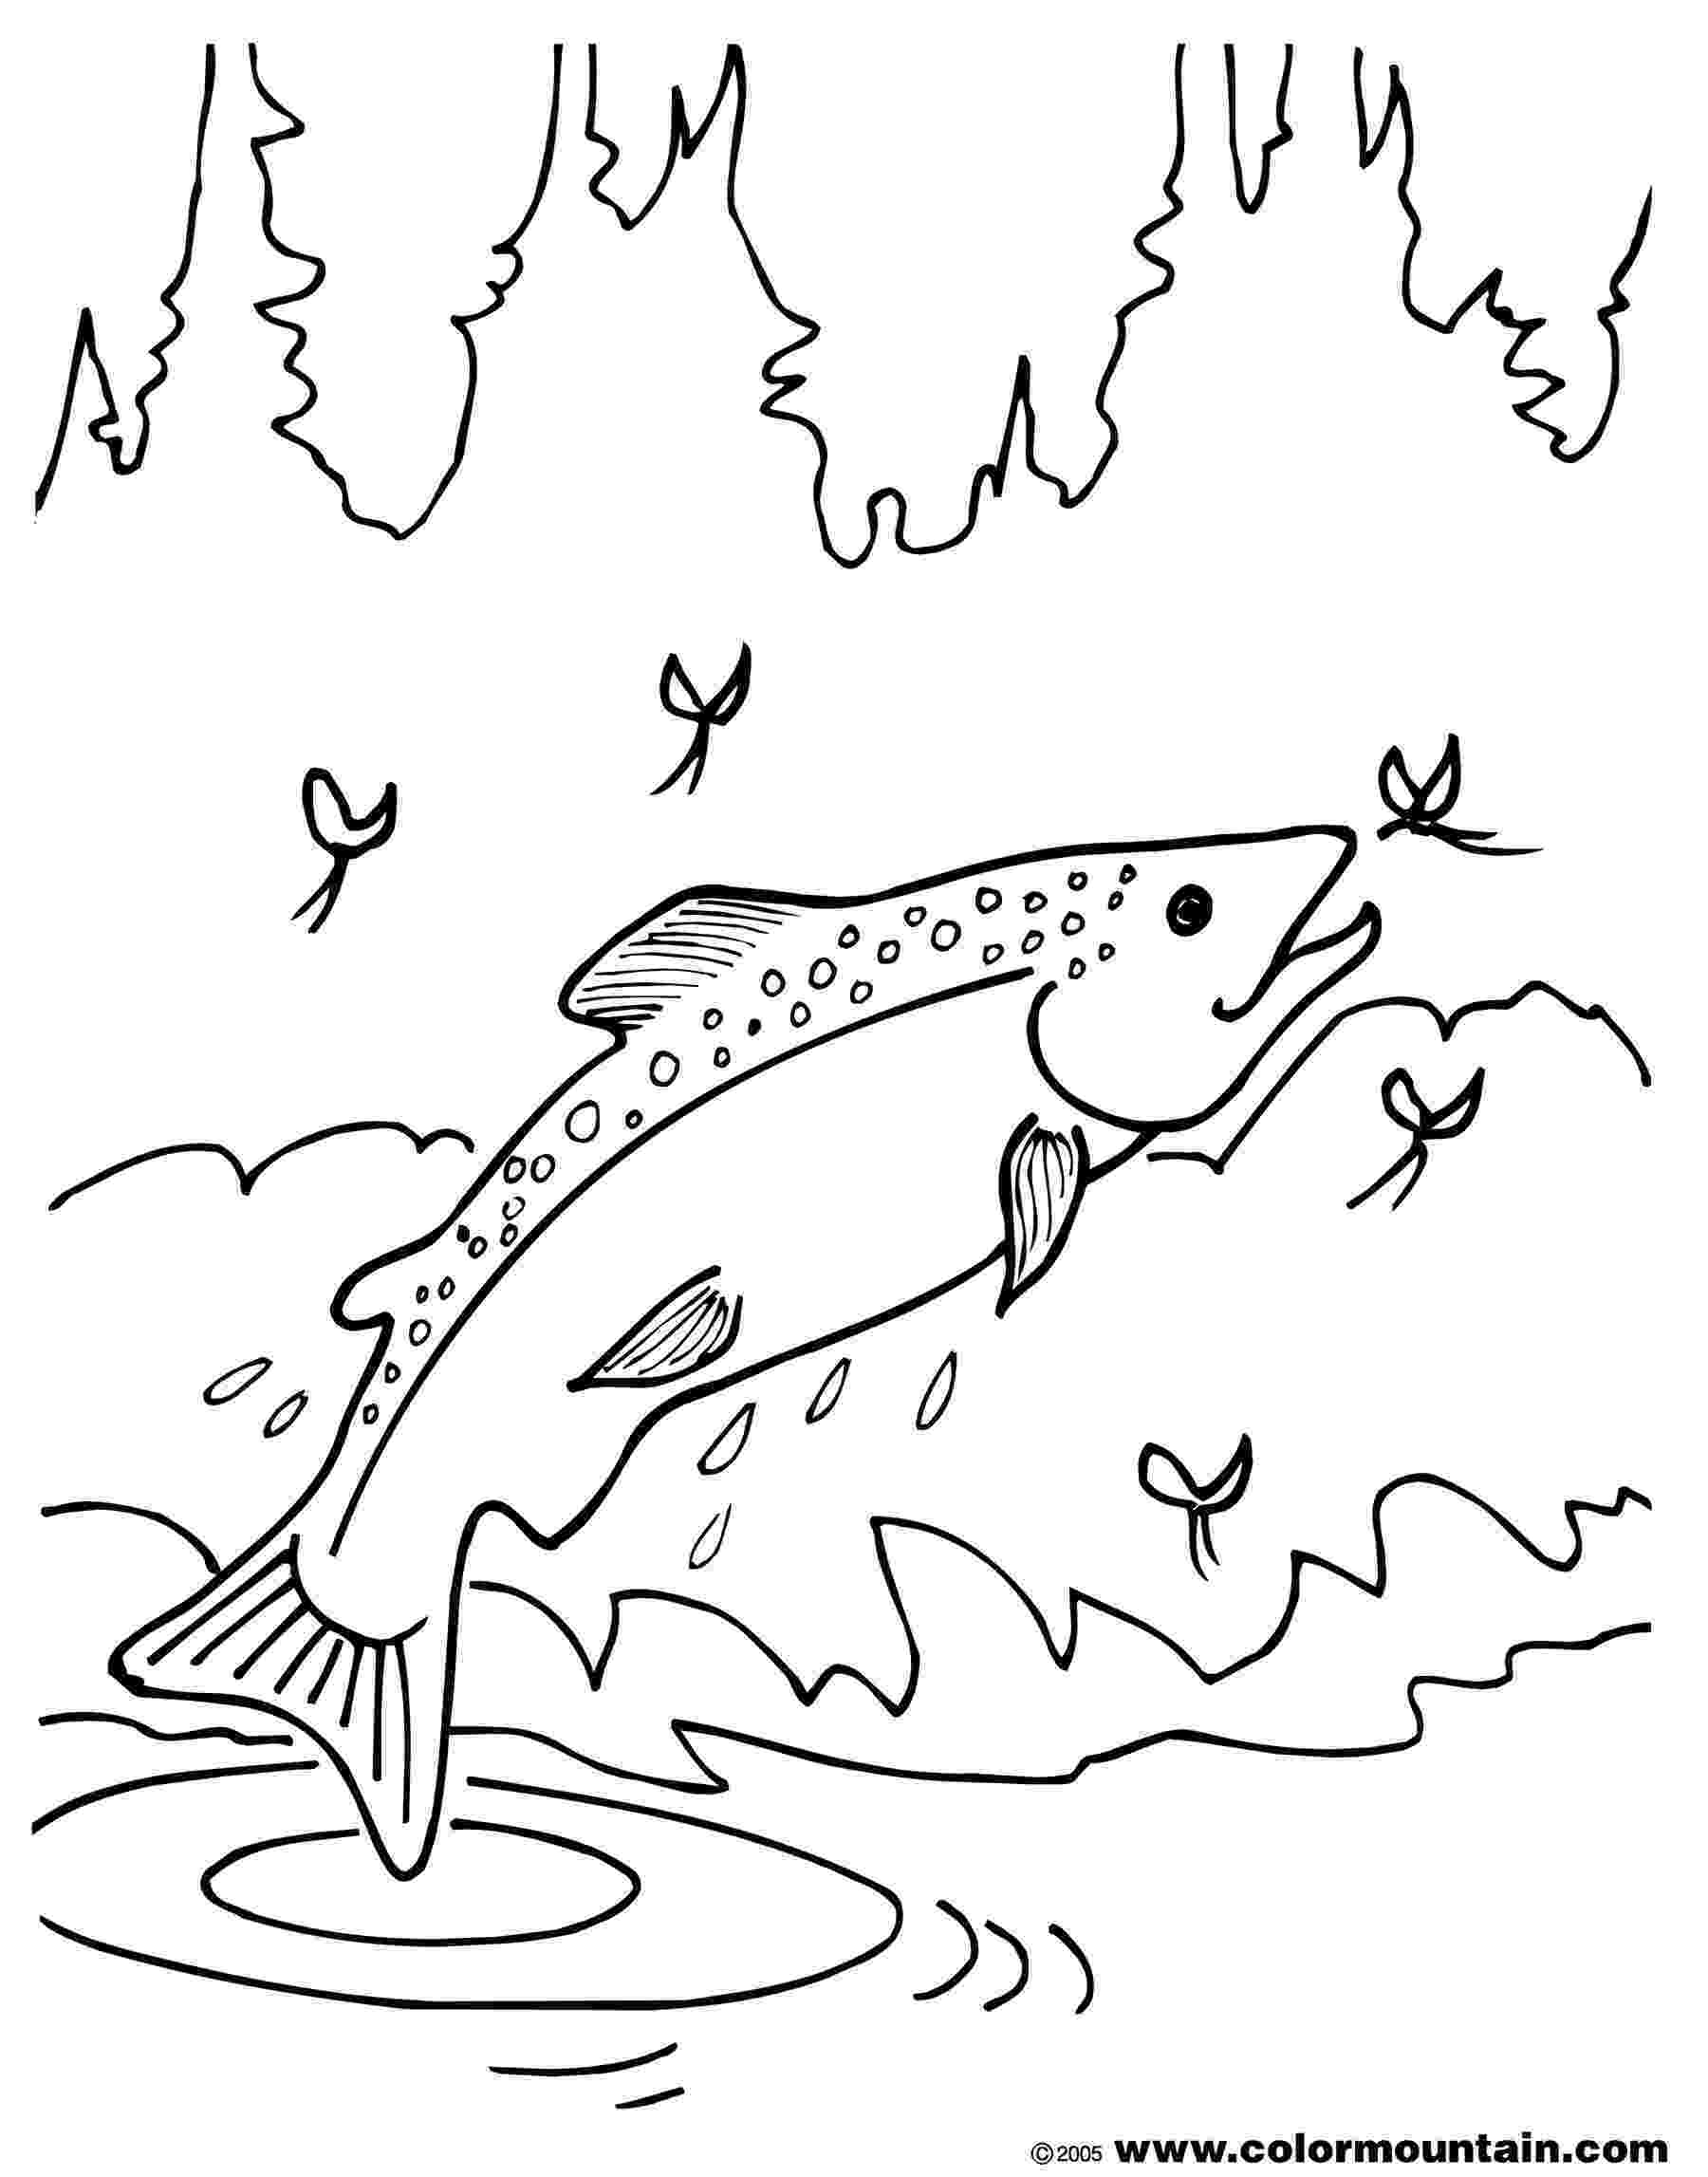 trout coloring page list of all flowers name beginning with ofrom a list of trout coloring page 